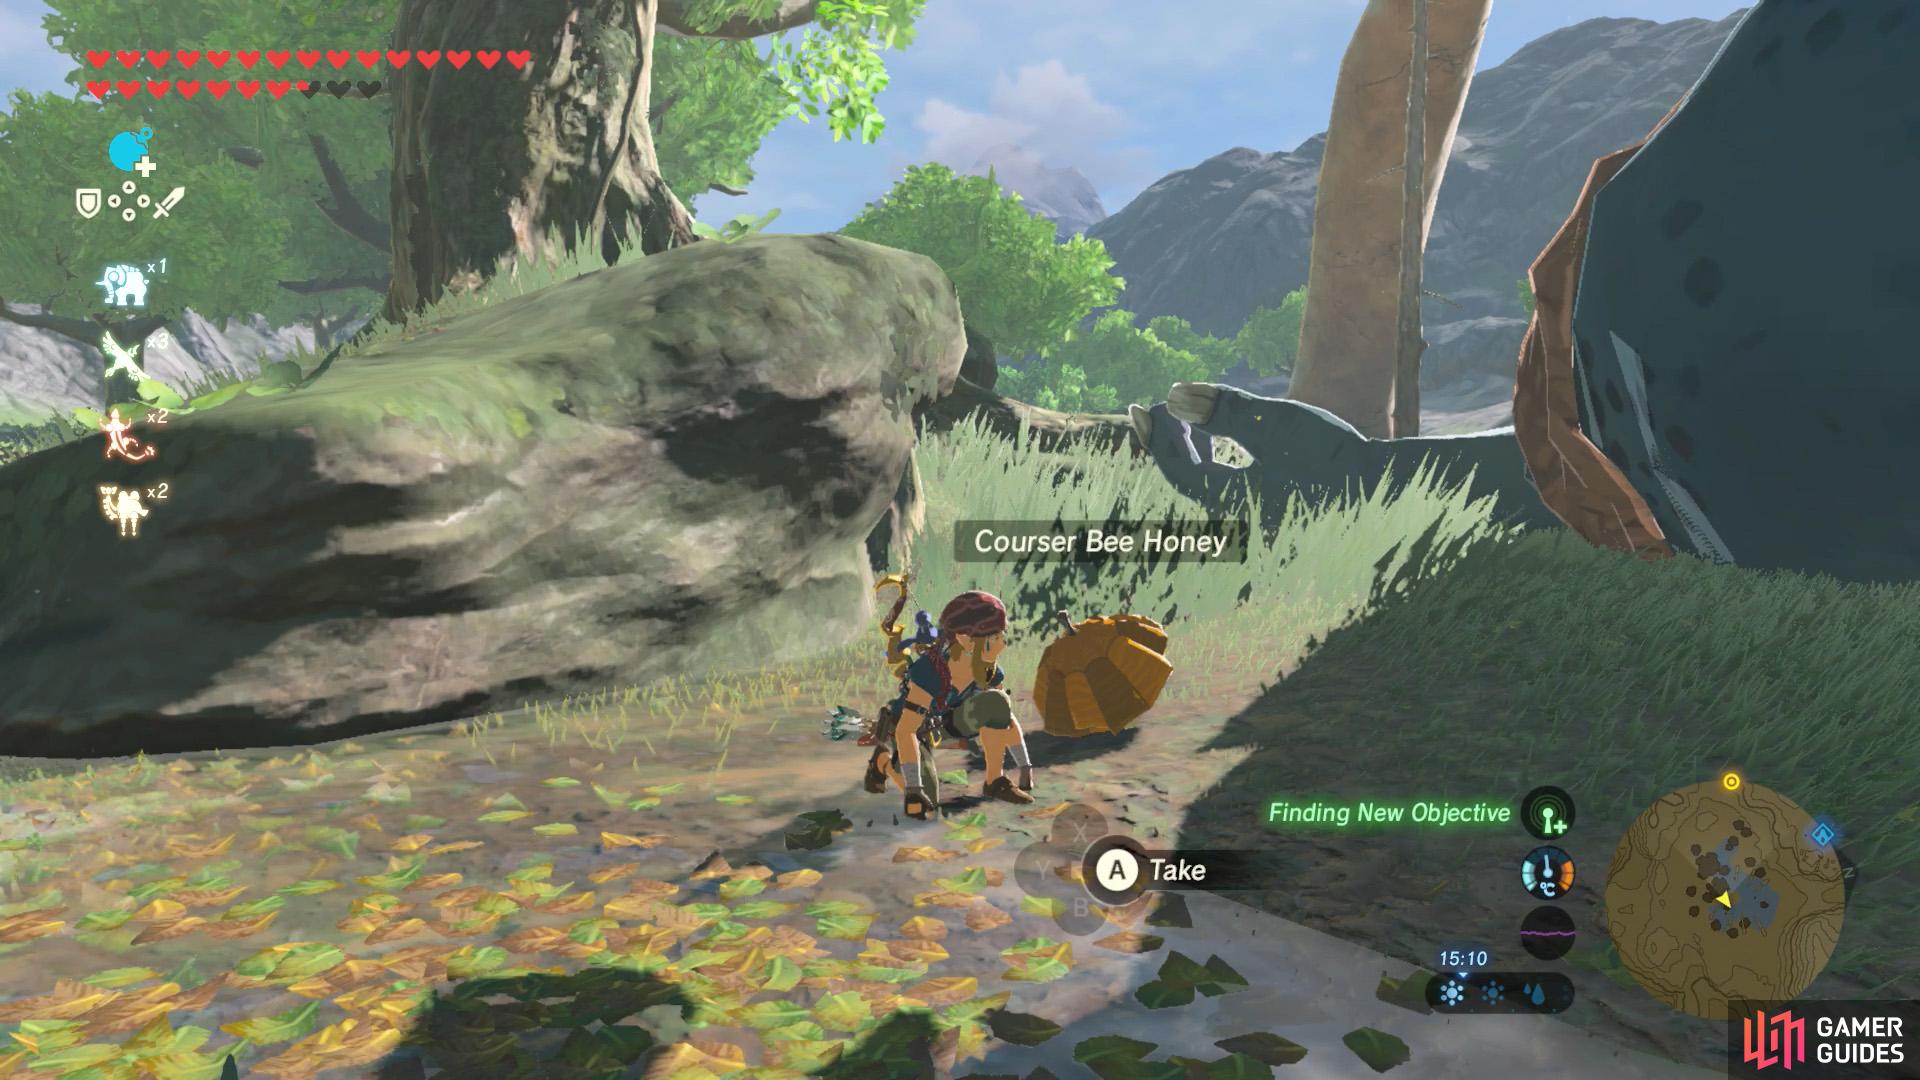 The bees will chase you, but you can outrun them or toss a bomb when you're far from the Hinox.